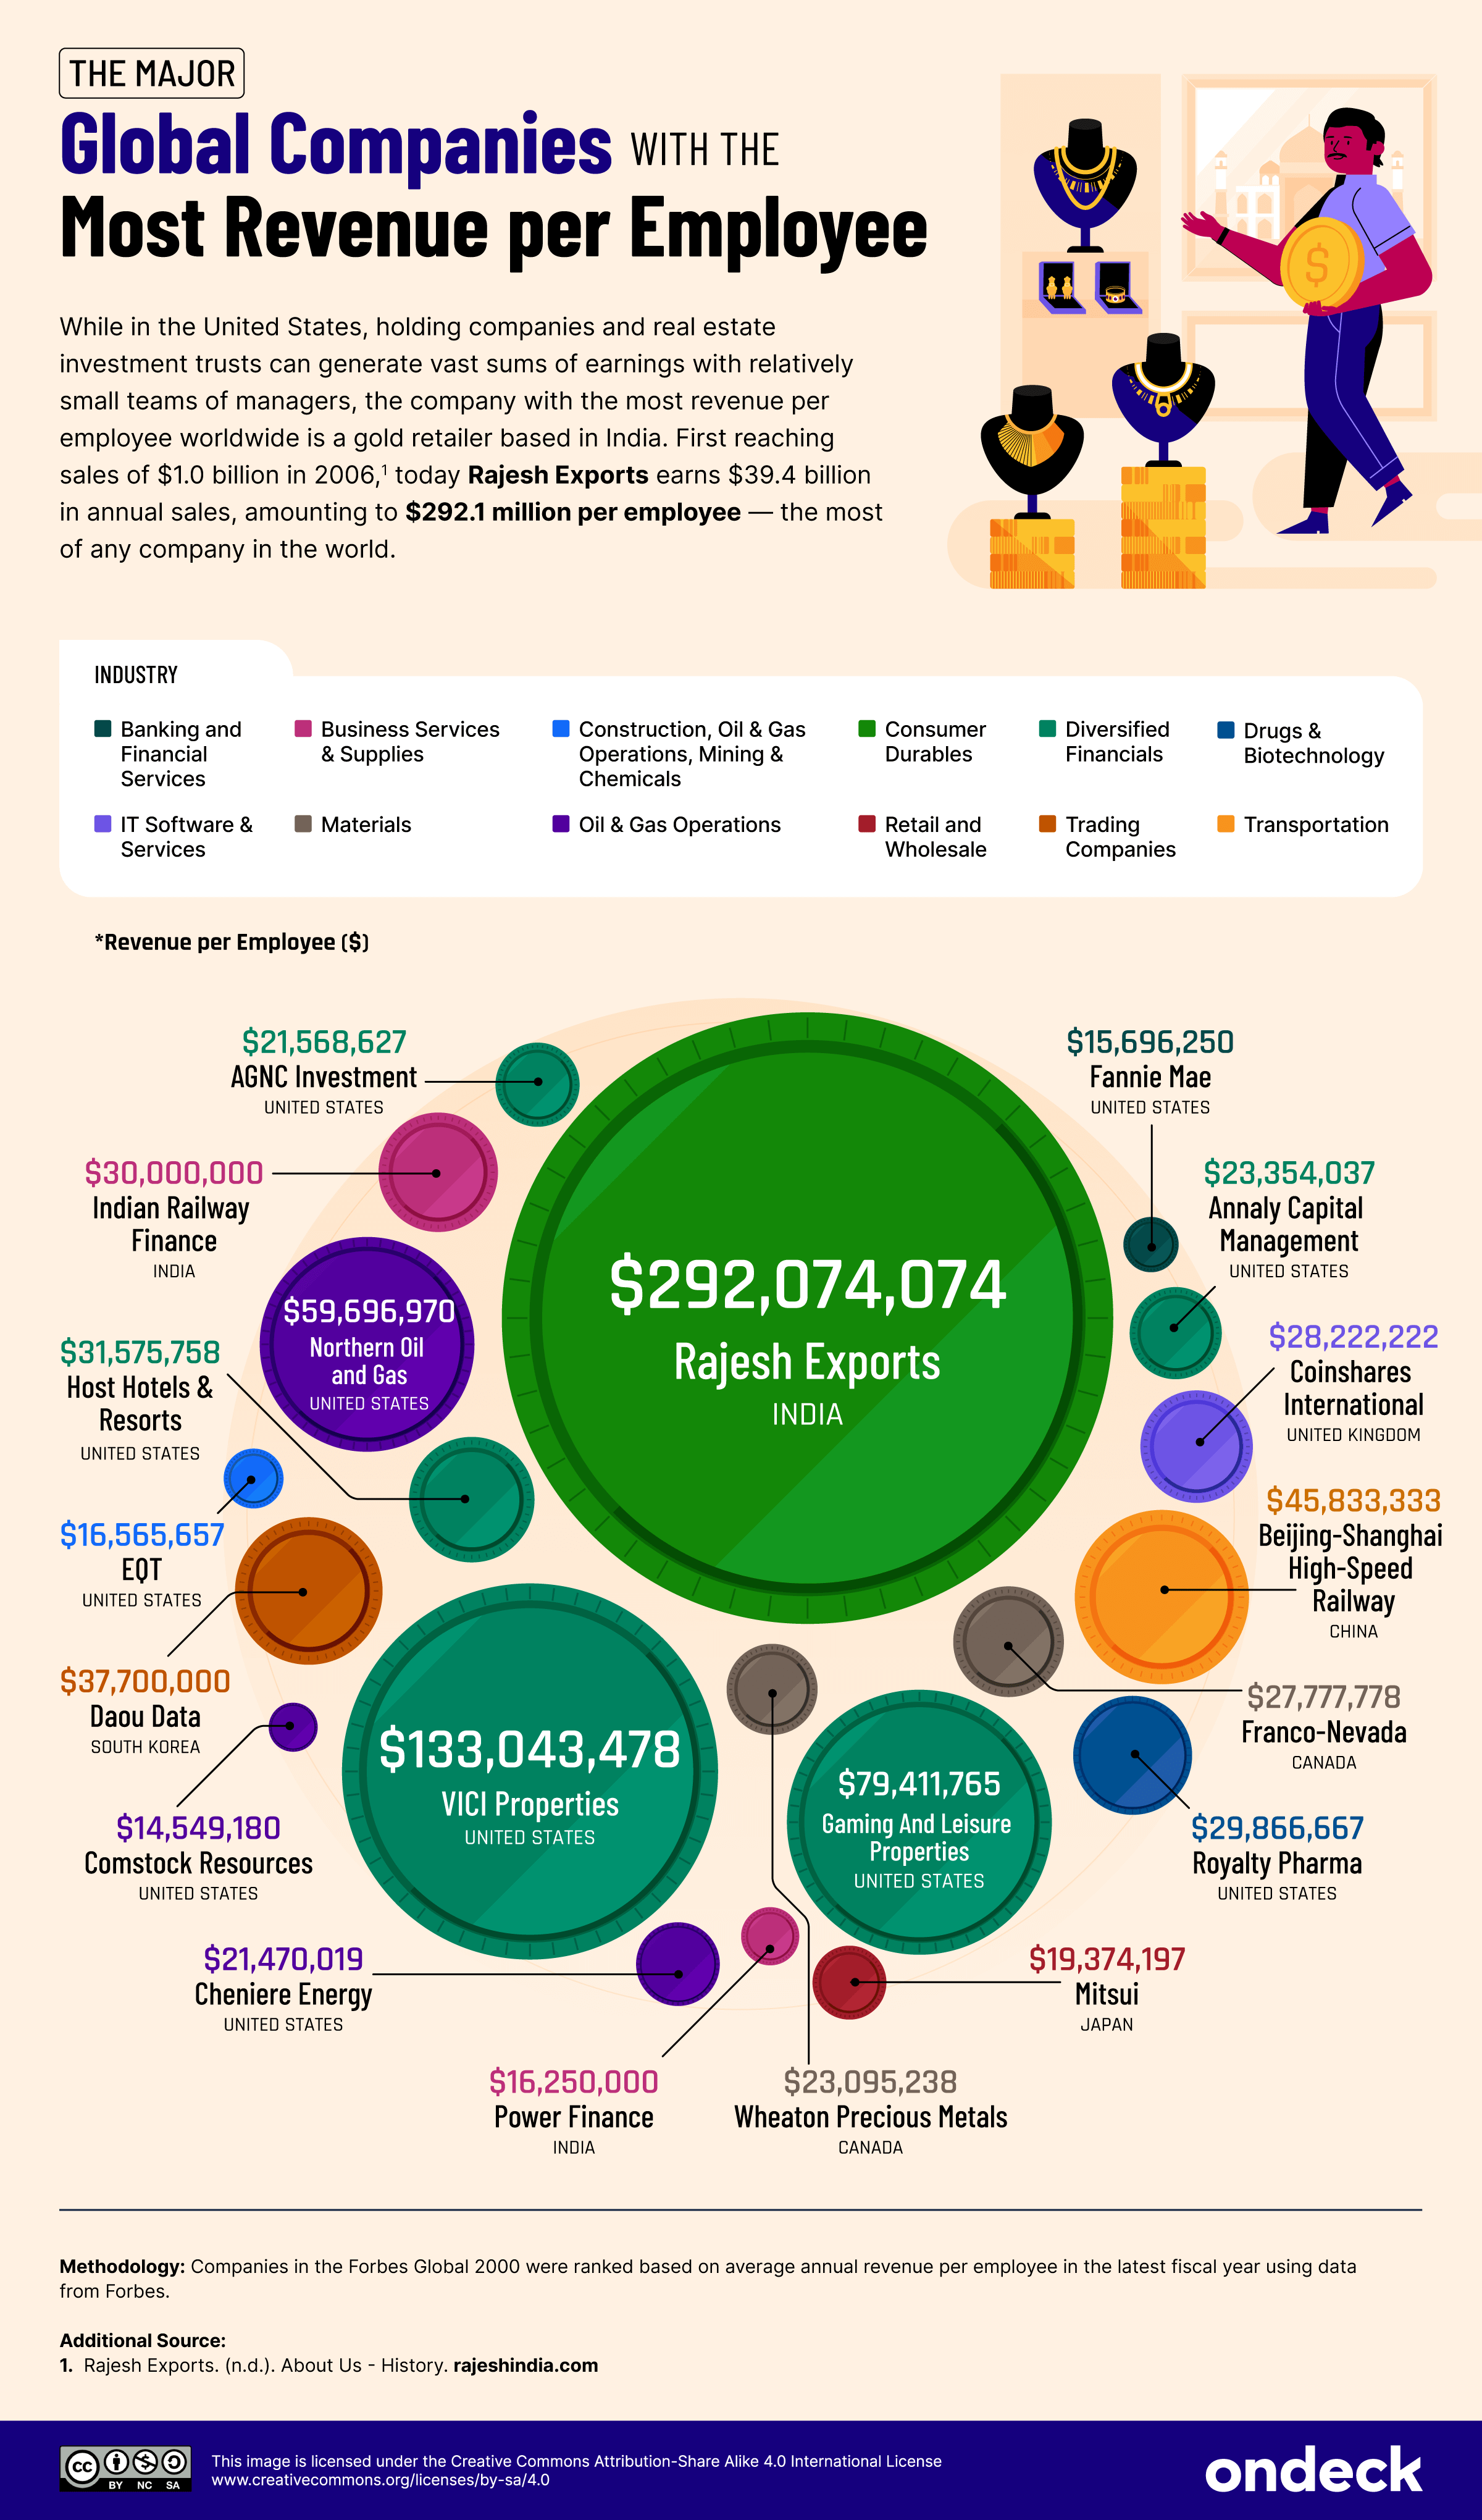 Infographic detailing the major global companies with the most revenue per employee.